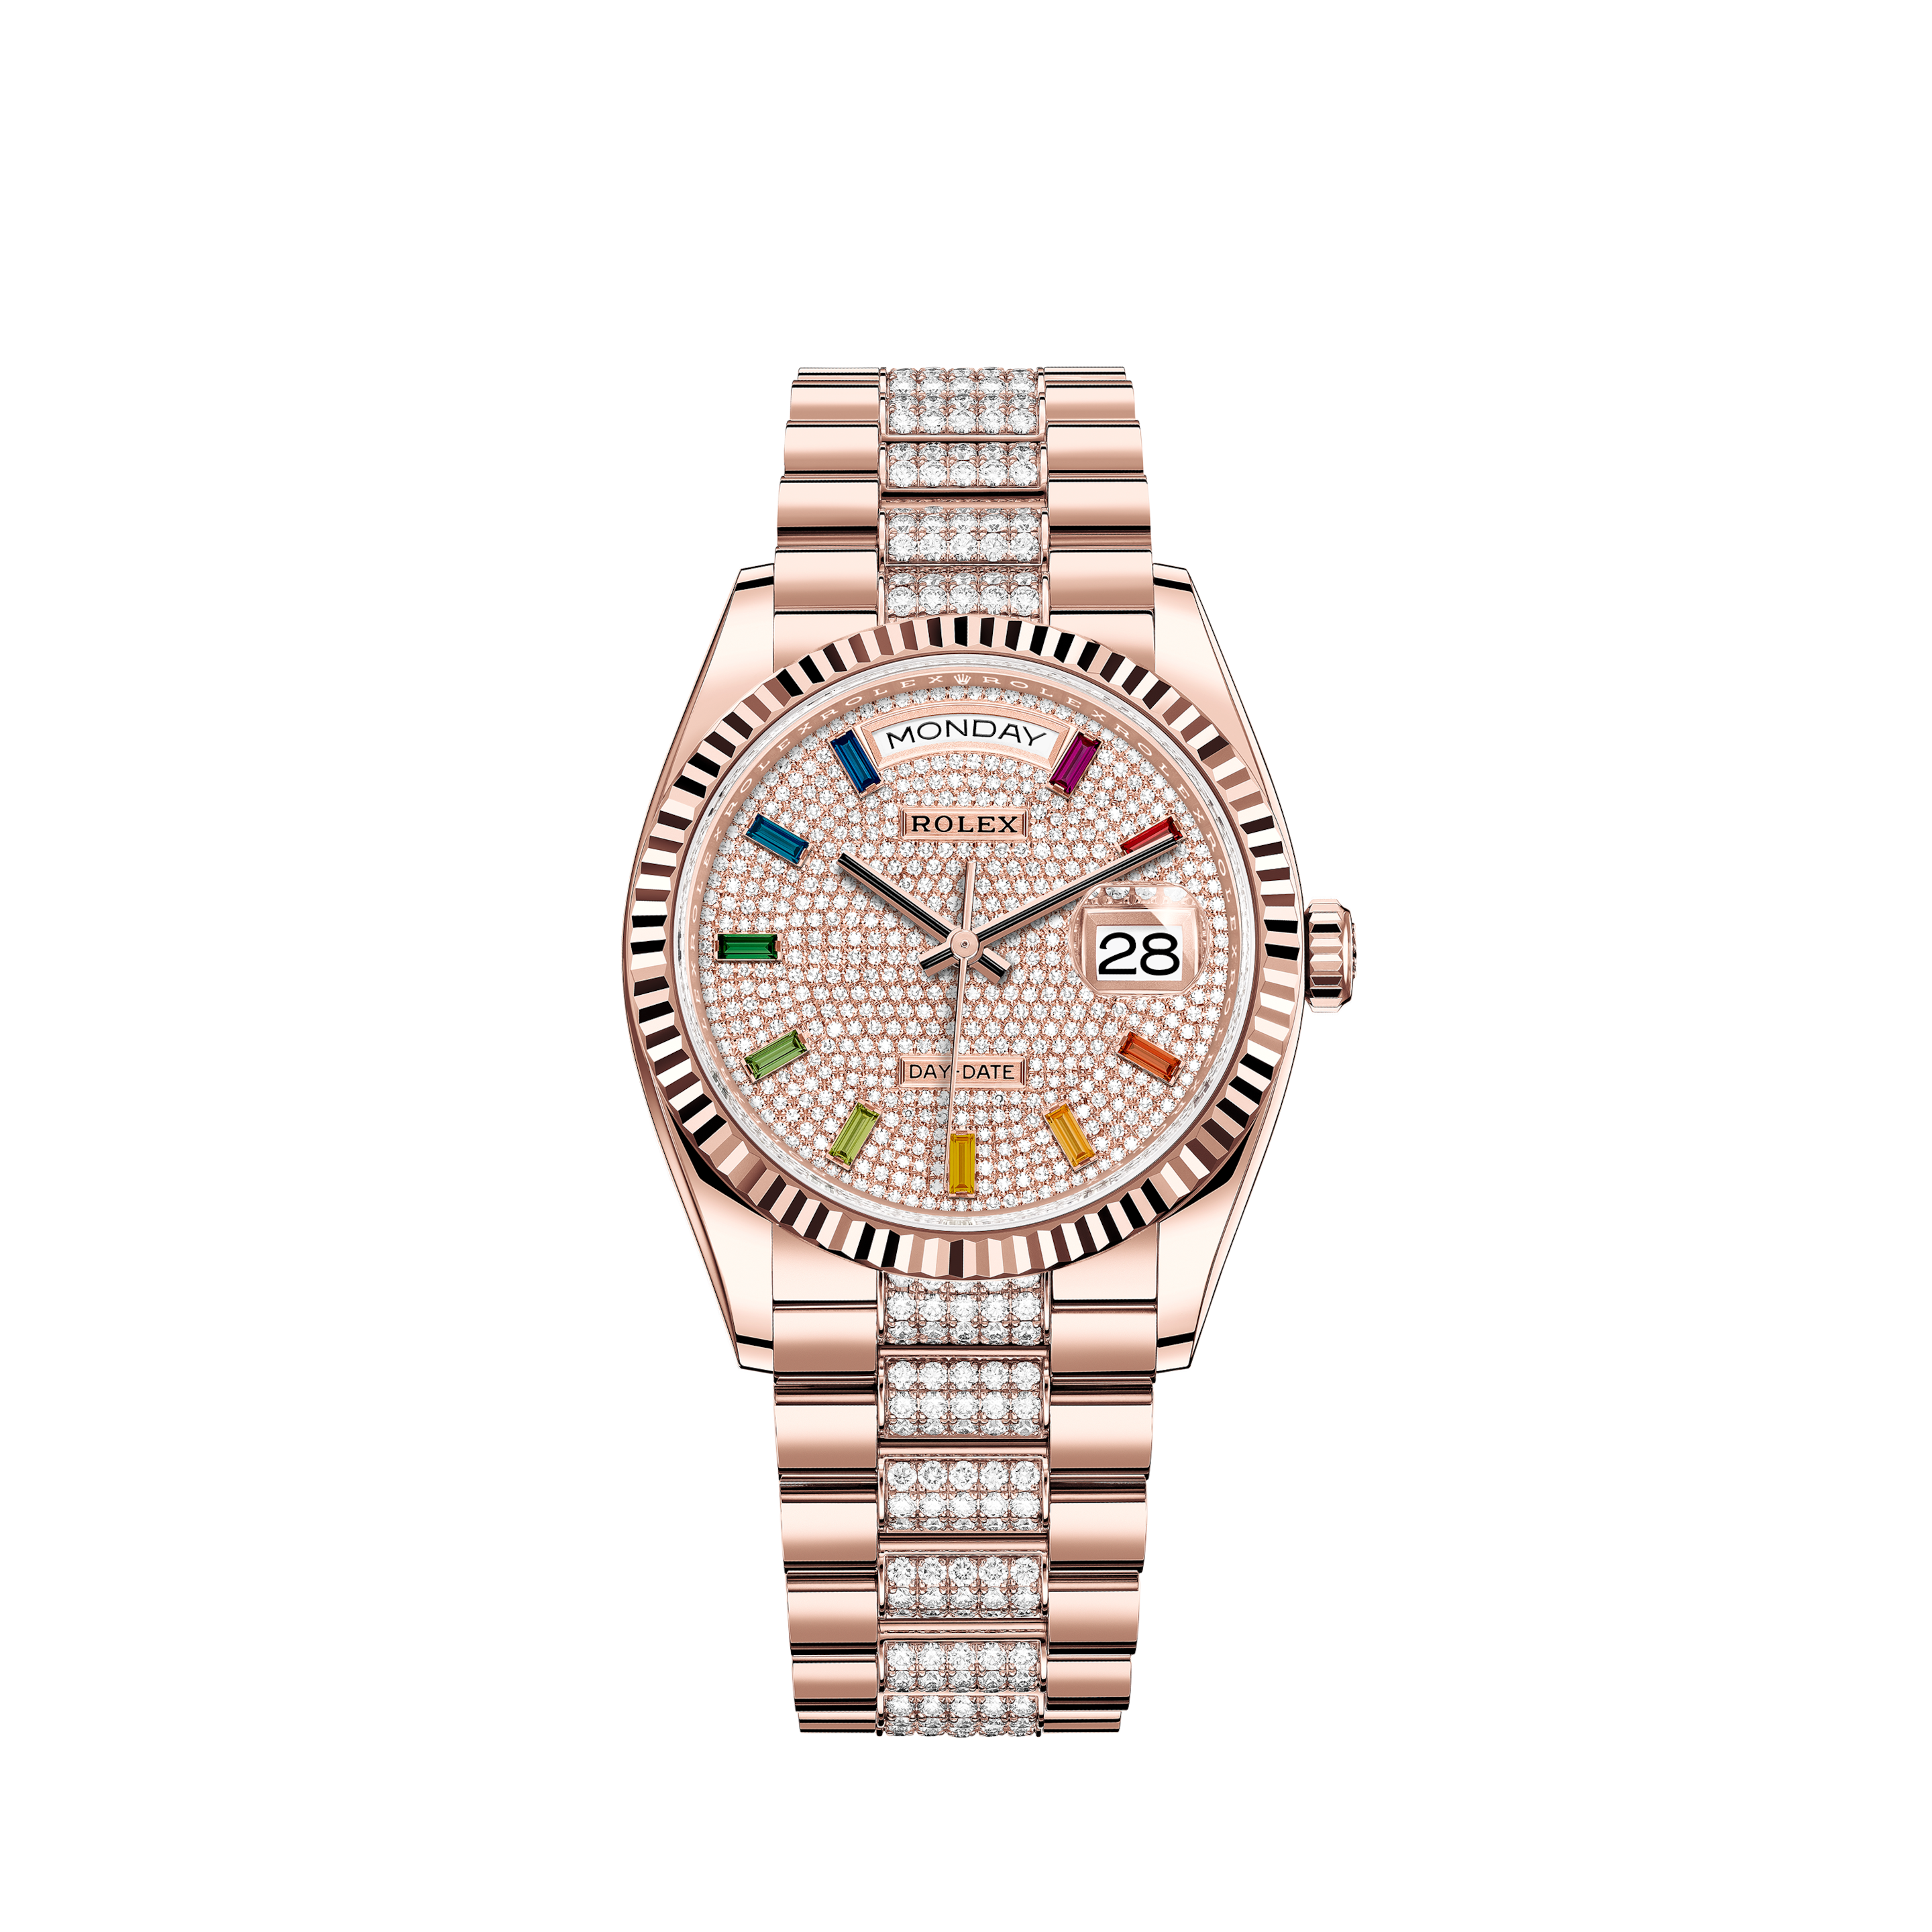 Rolex 36mm Datejust Pink Mother Of Pearl Dial with a Track Fluted Gold Bezel Diamond Lugs